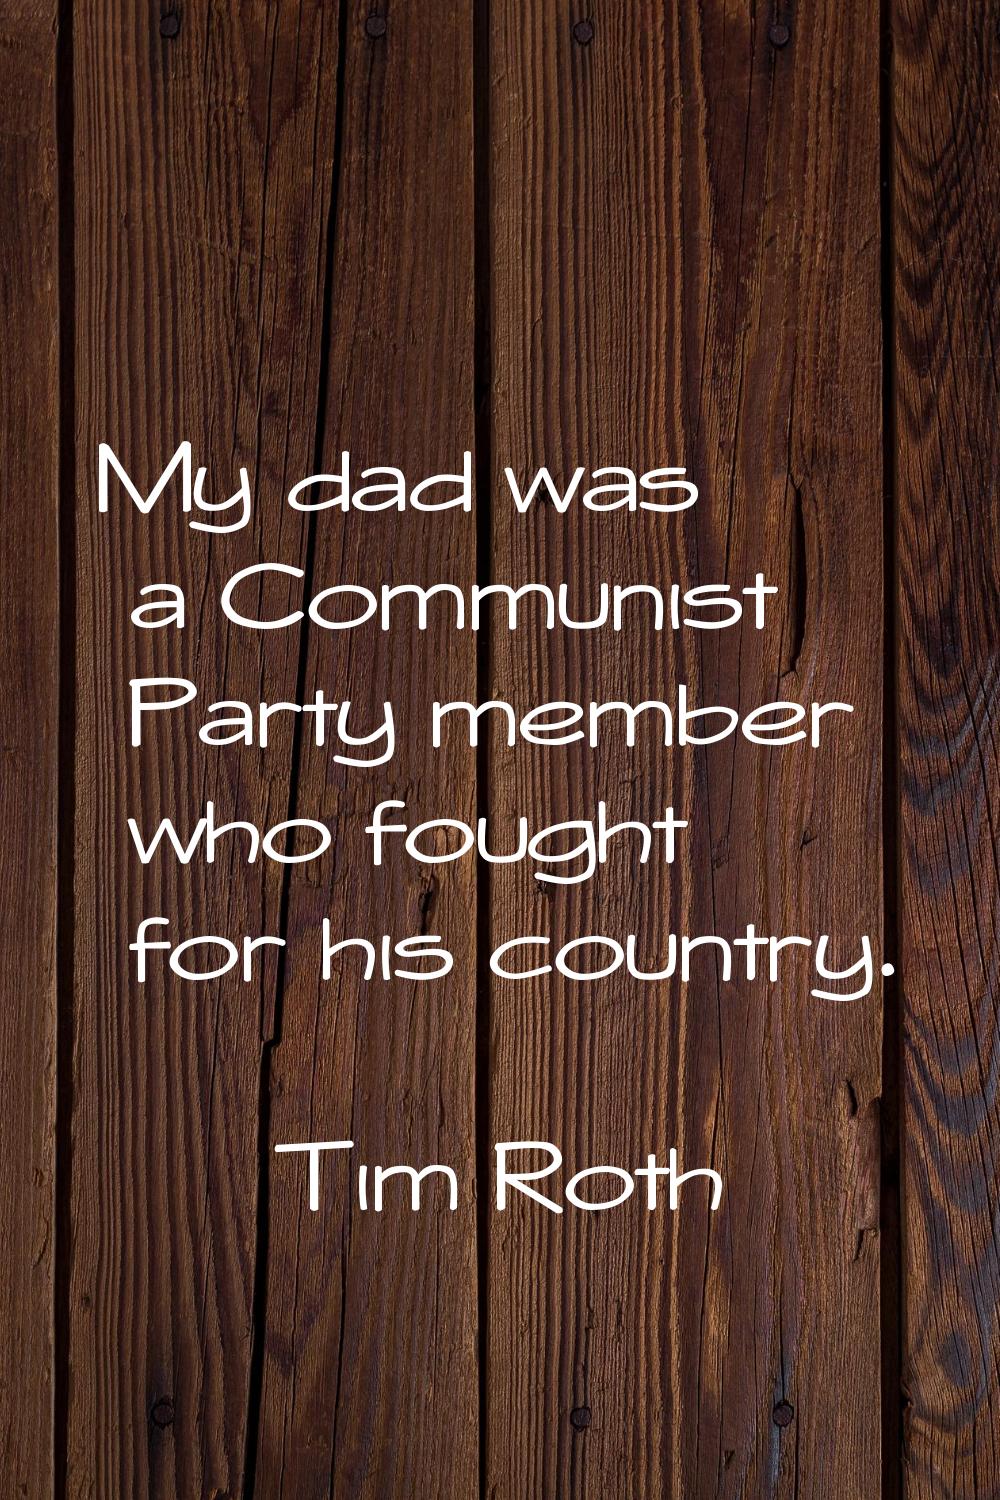 My dad was a Communist Party member who fought for his country.